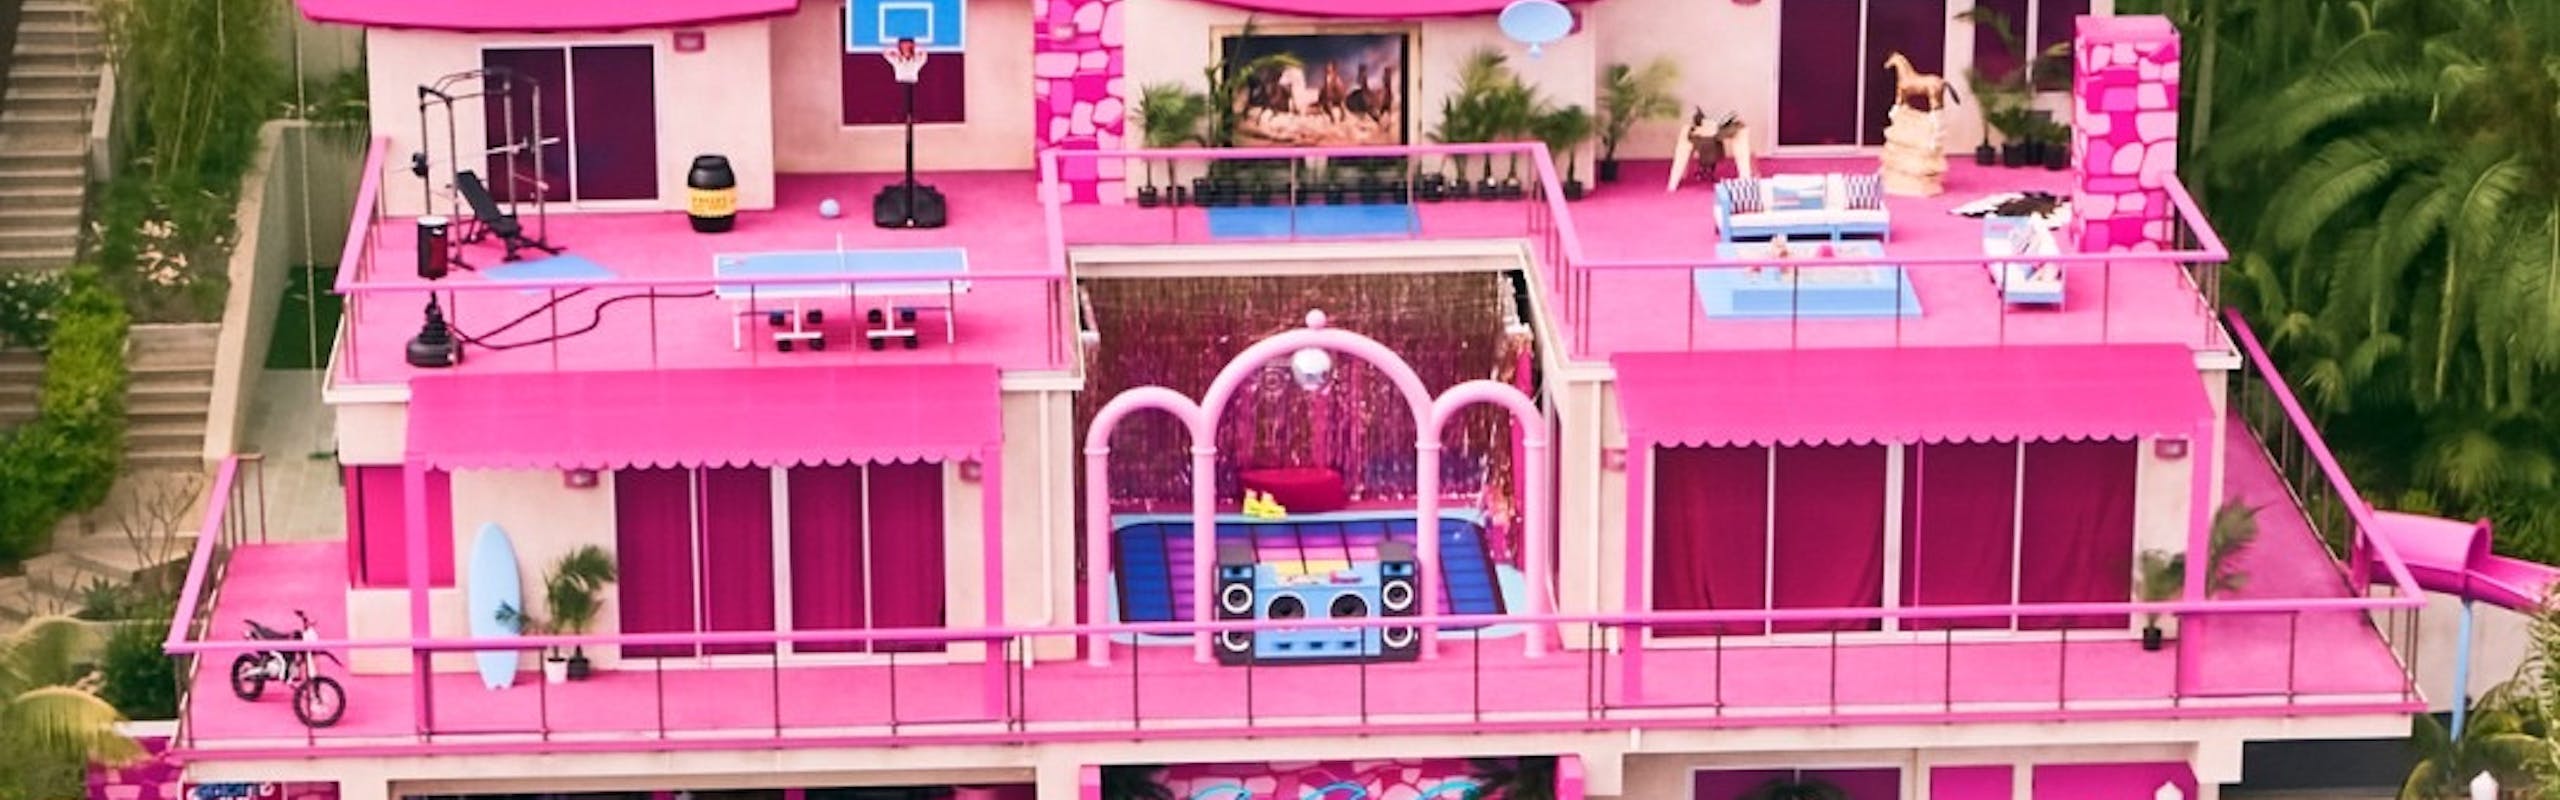 Barbie Malibu DreamHouse on Airbnb, hosted by Ken (Ryan Gosling) to promote new Barbie film.